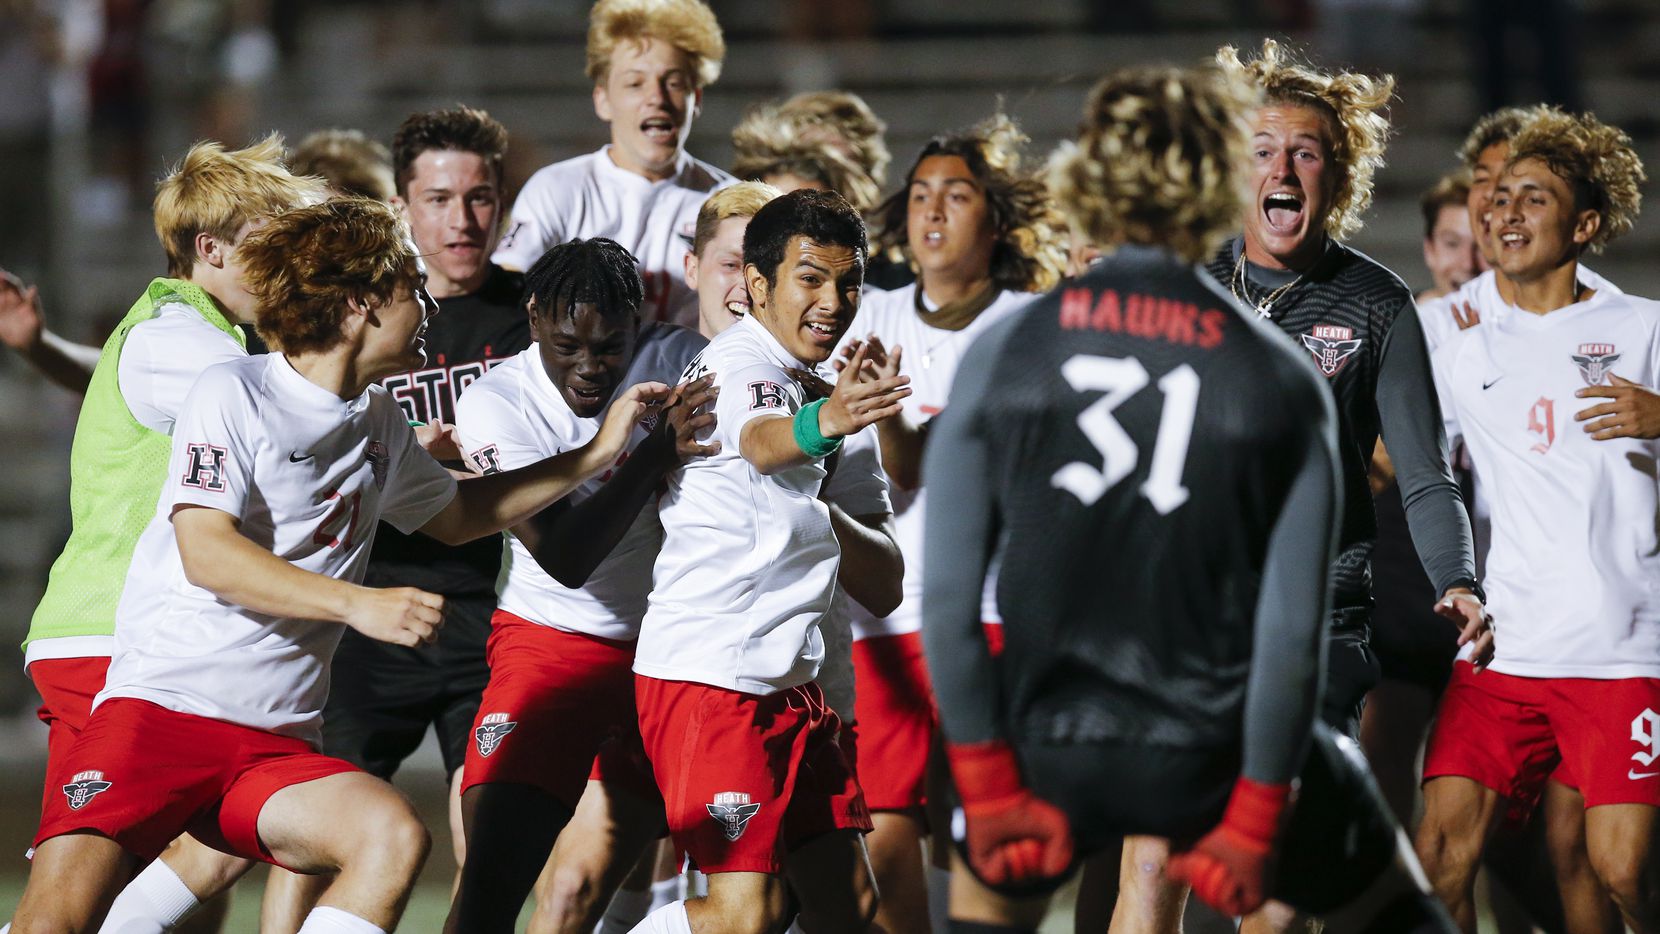 Rockwall-Heath senior defender Oscar Perales, center, is mobbed by teammates after scoring the game winning goal in a shootout after a boys soccer Class 6A state semifinal against Allen at Mesquite Memorial Stadium in Mesquite, Tuesday, April 13, 2021. Rockwall-Heath won 3-1 in a shootout.